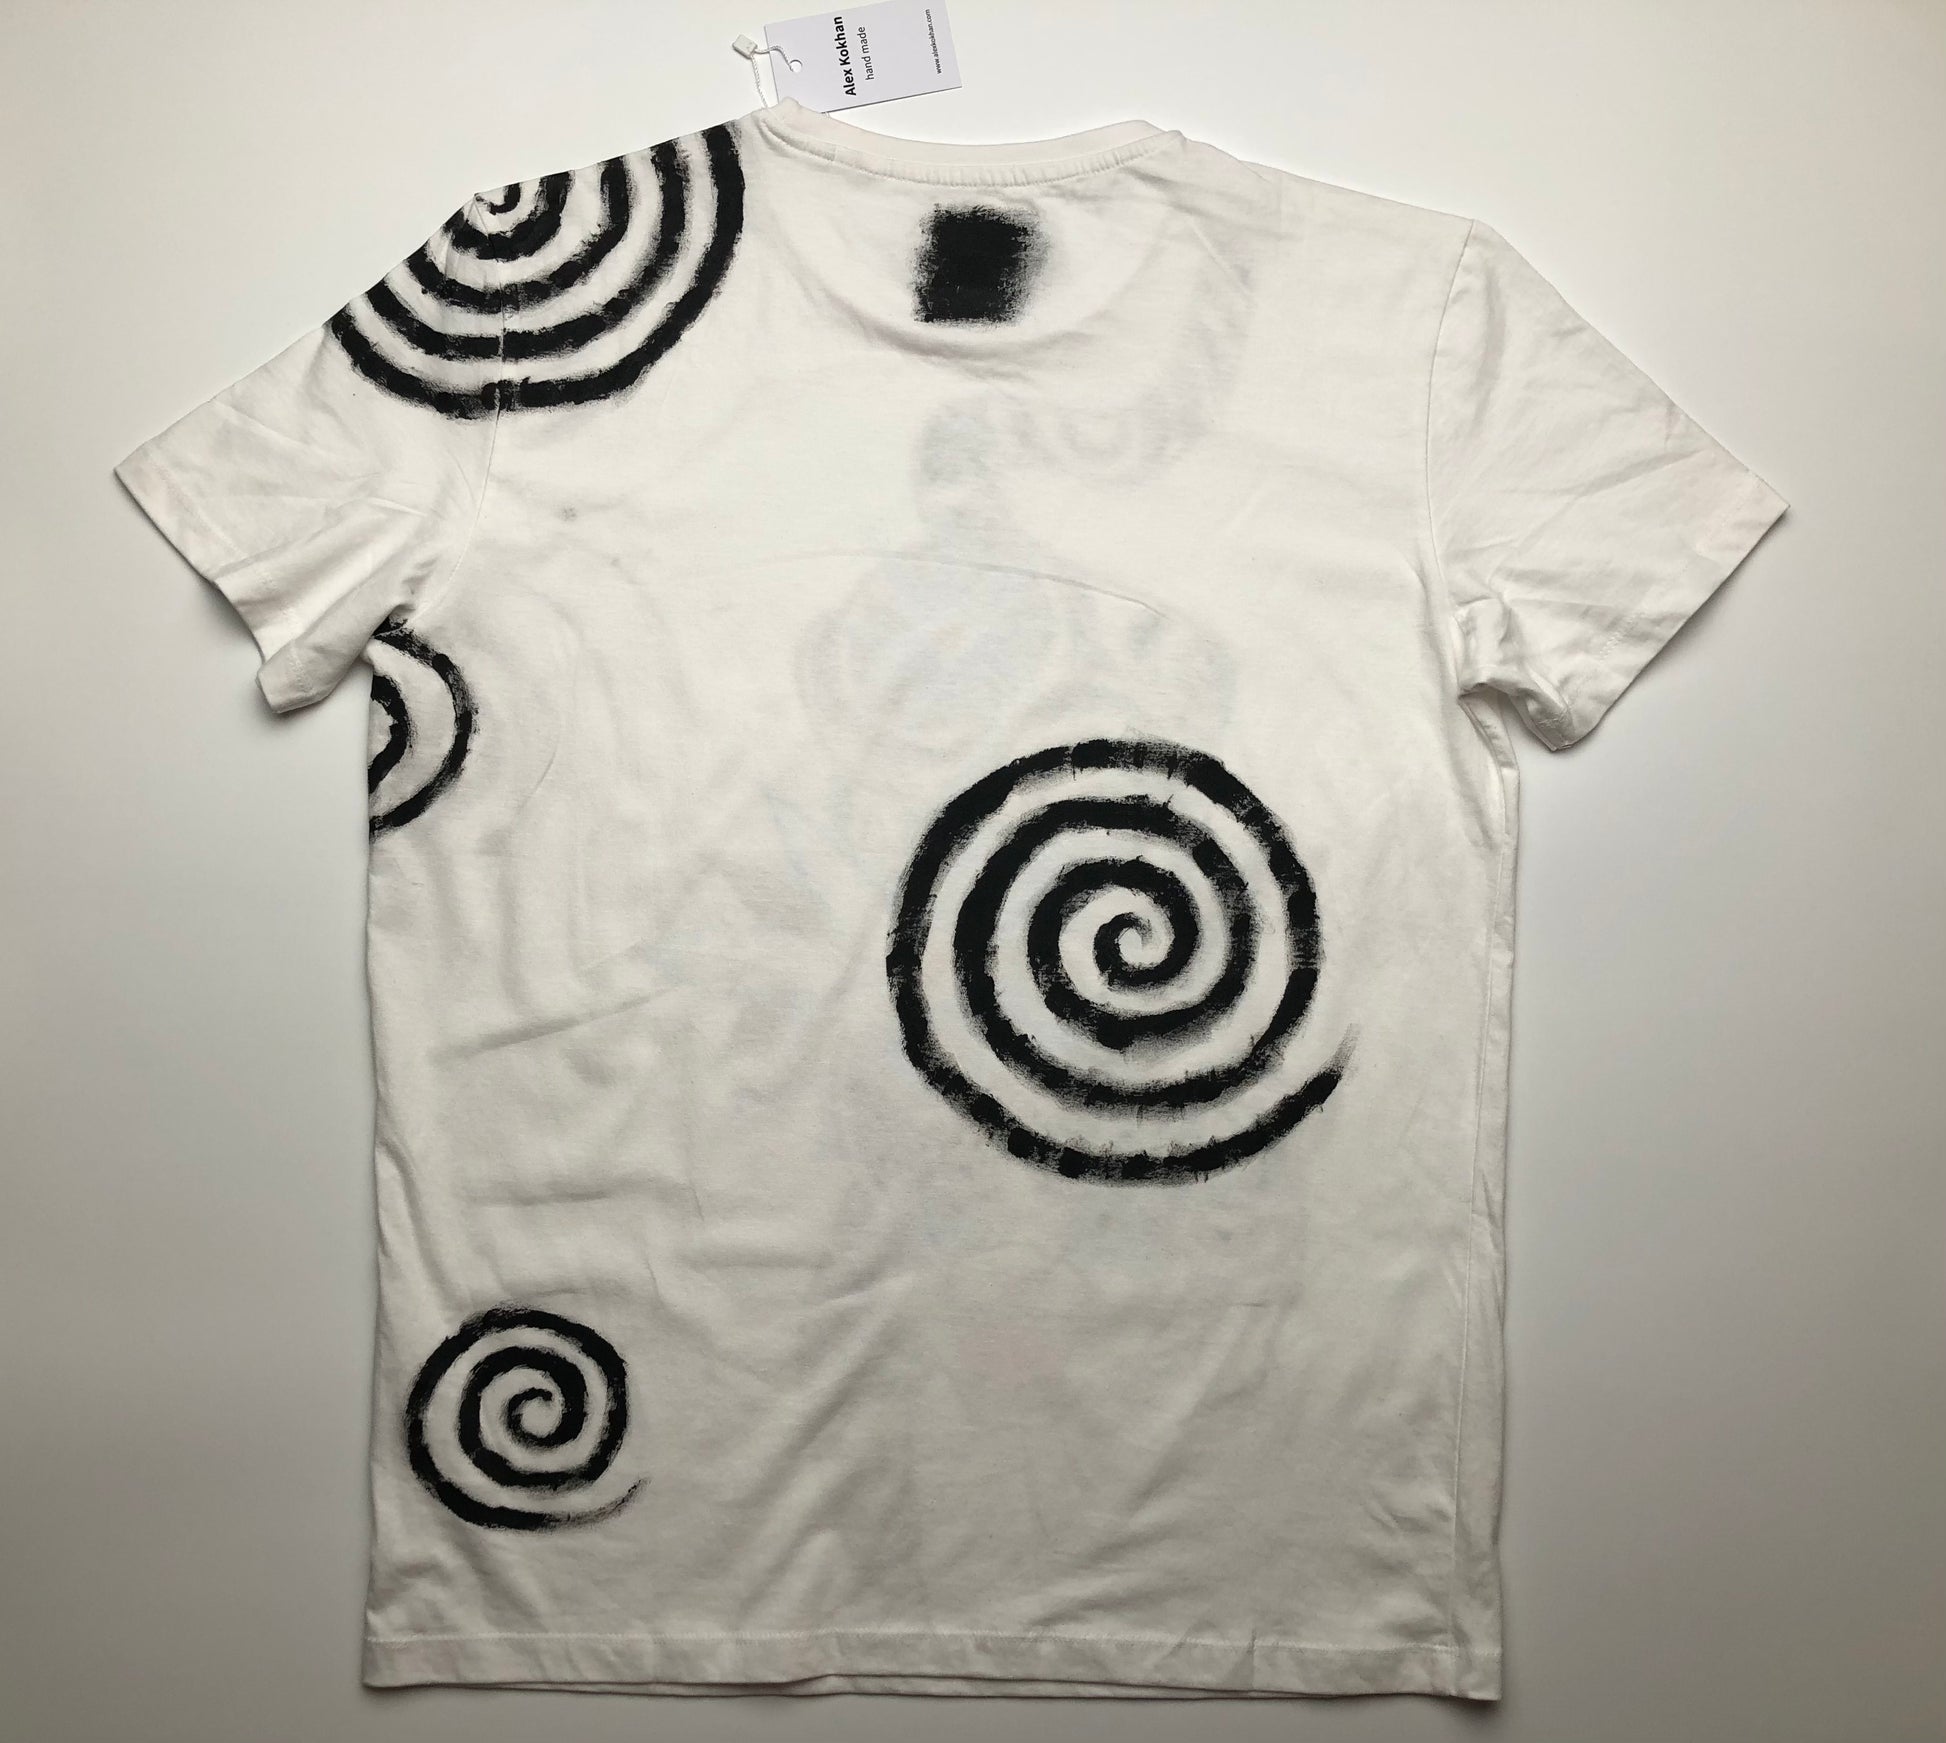 The reverse side of a men's T-shirt with a handmade pattern